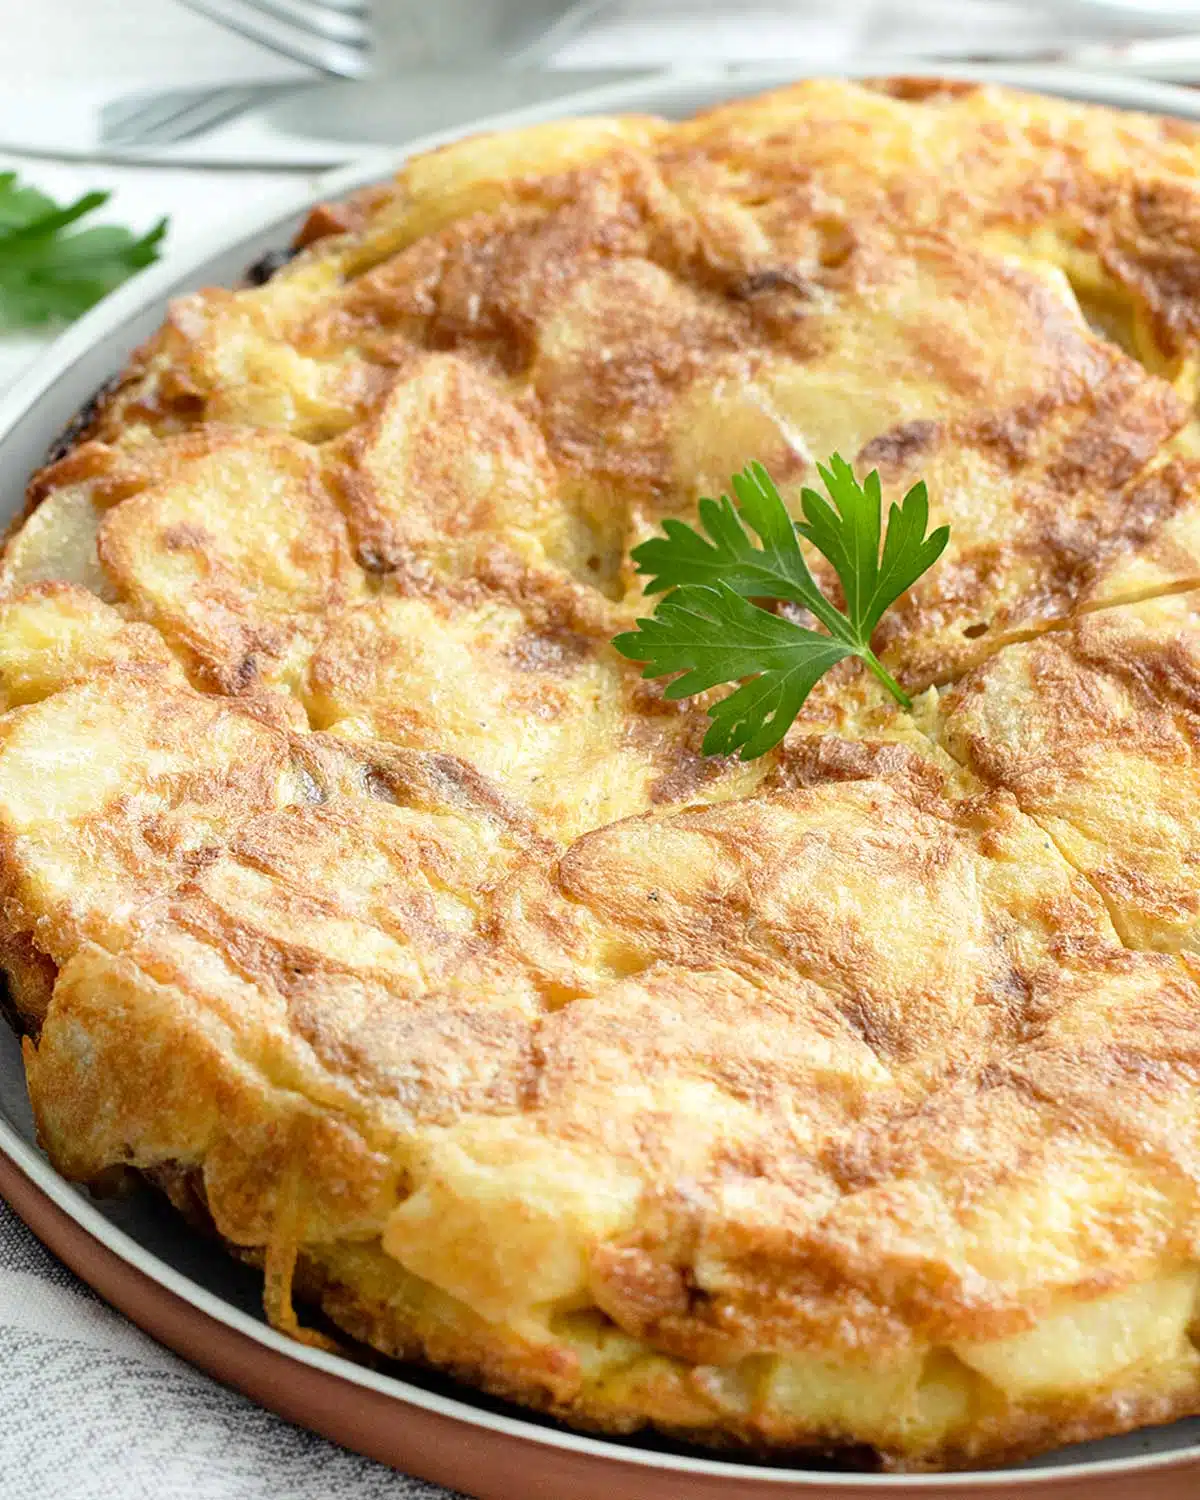 Spanish Tortilla - Craving Home Cooked